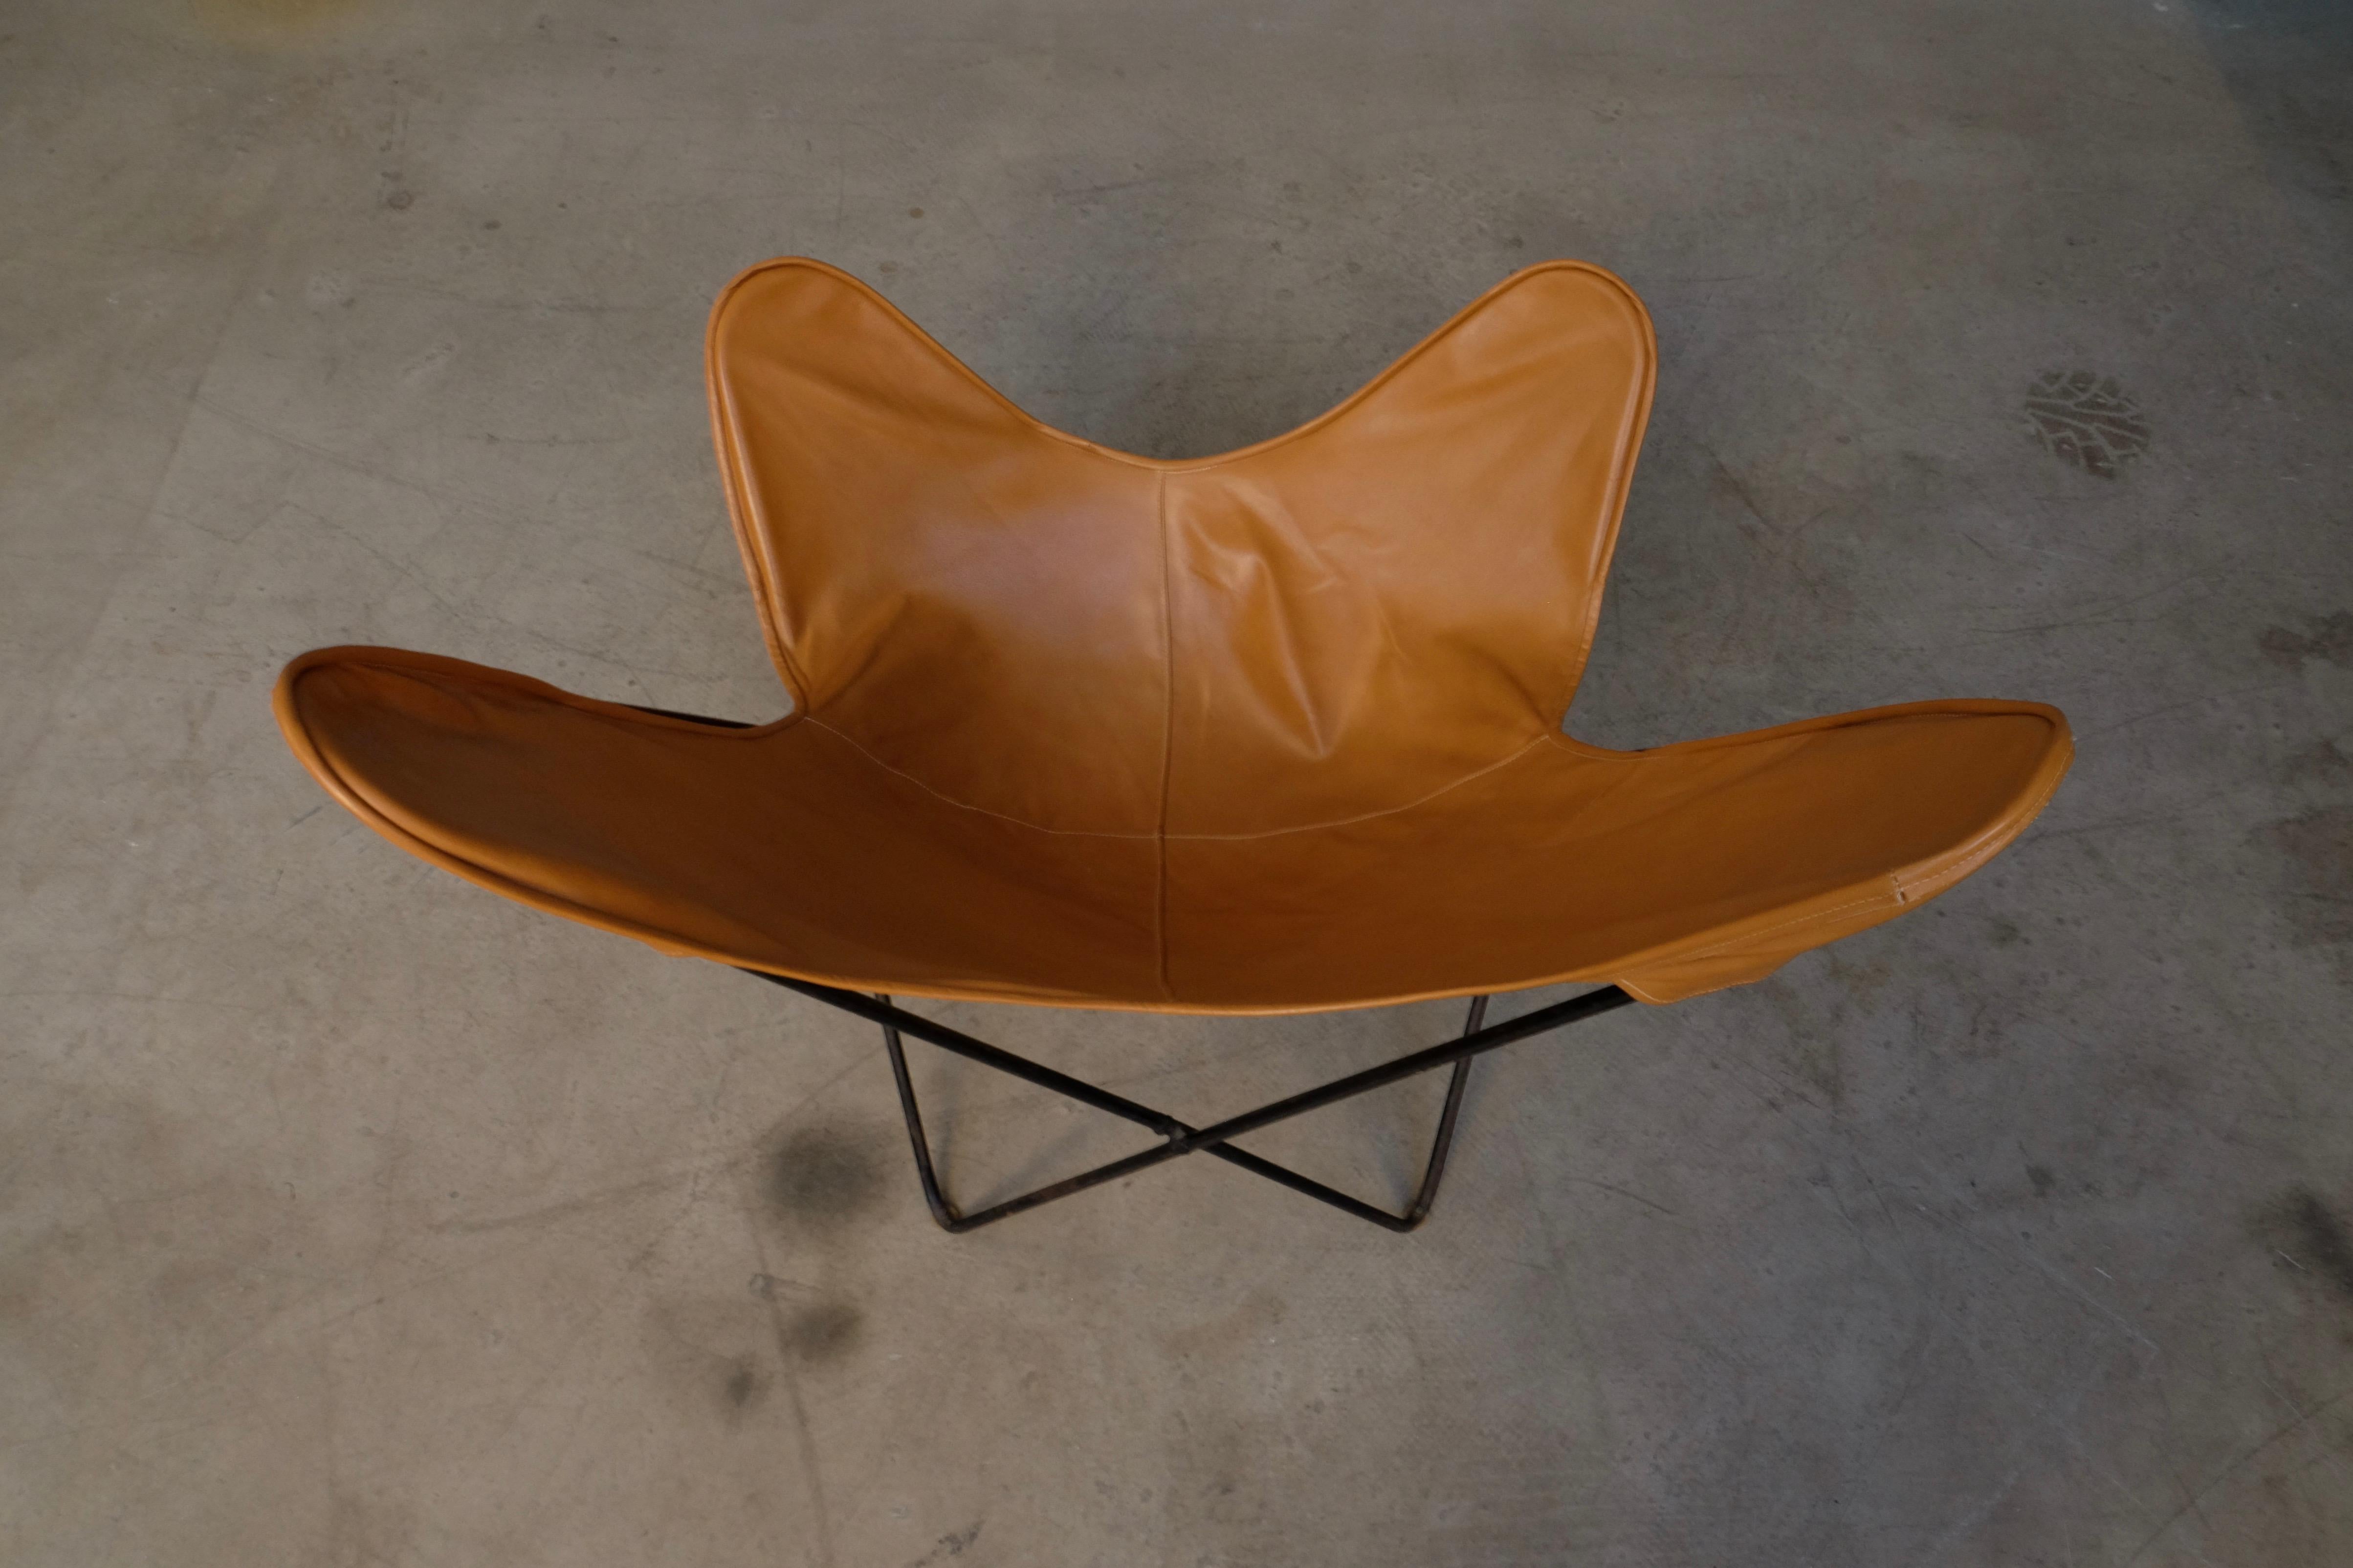 1960s butterfly chair